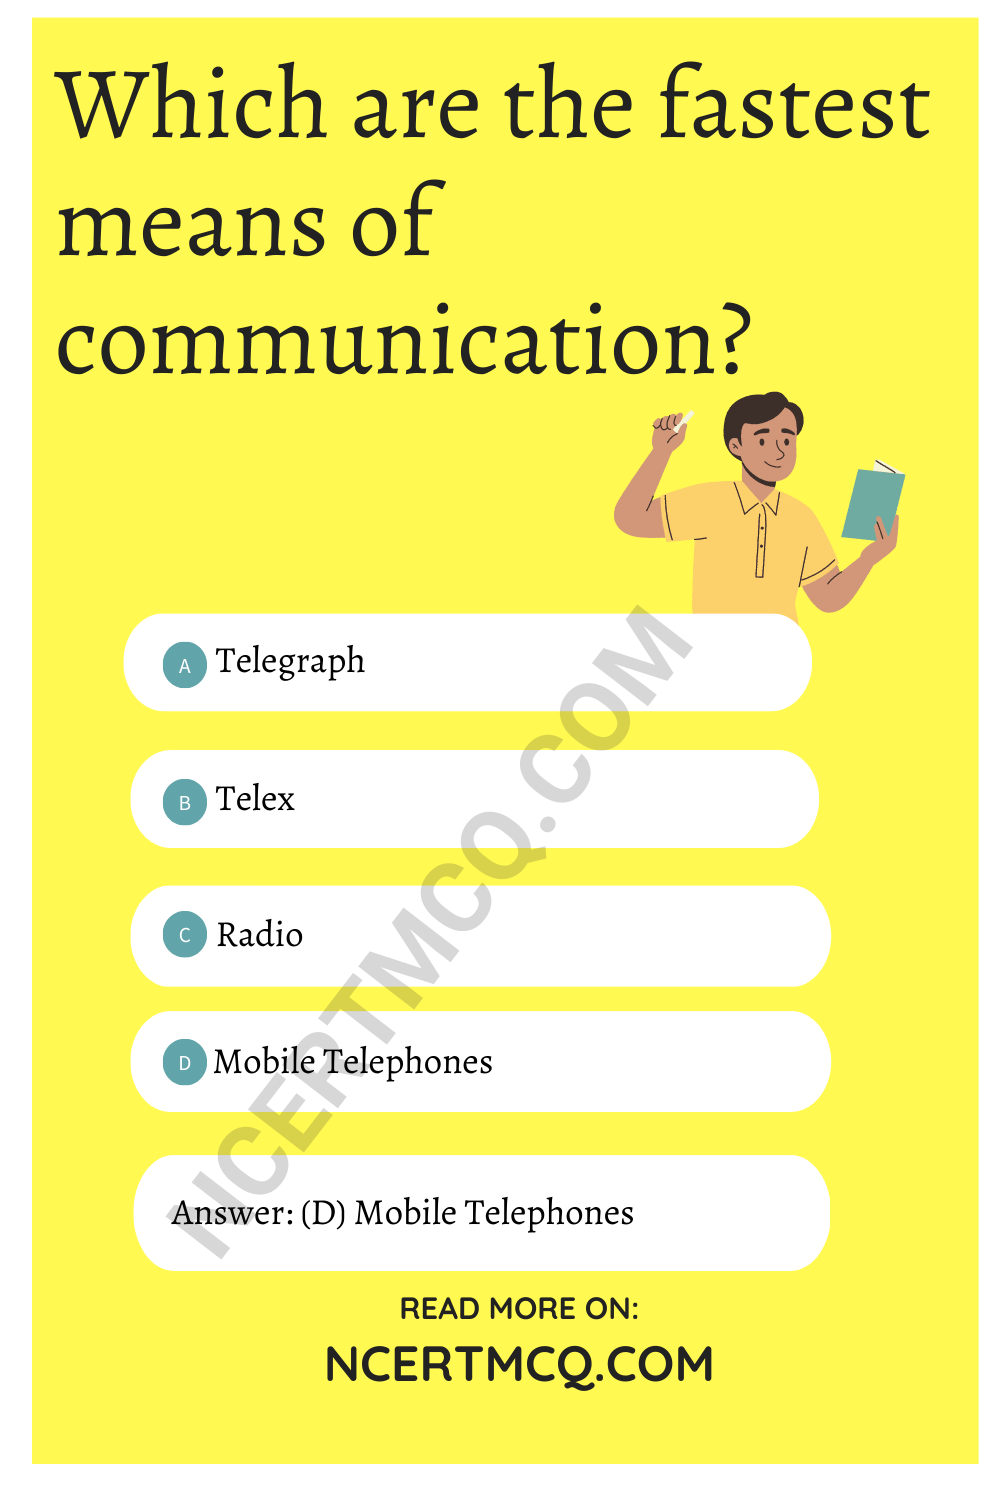 Which are the fastest means of communication?